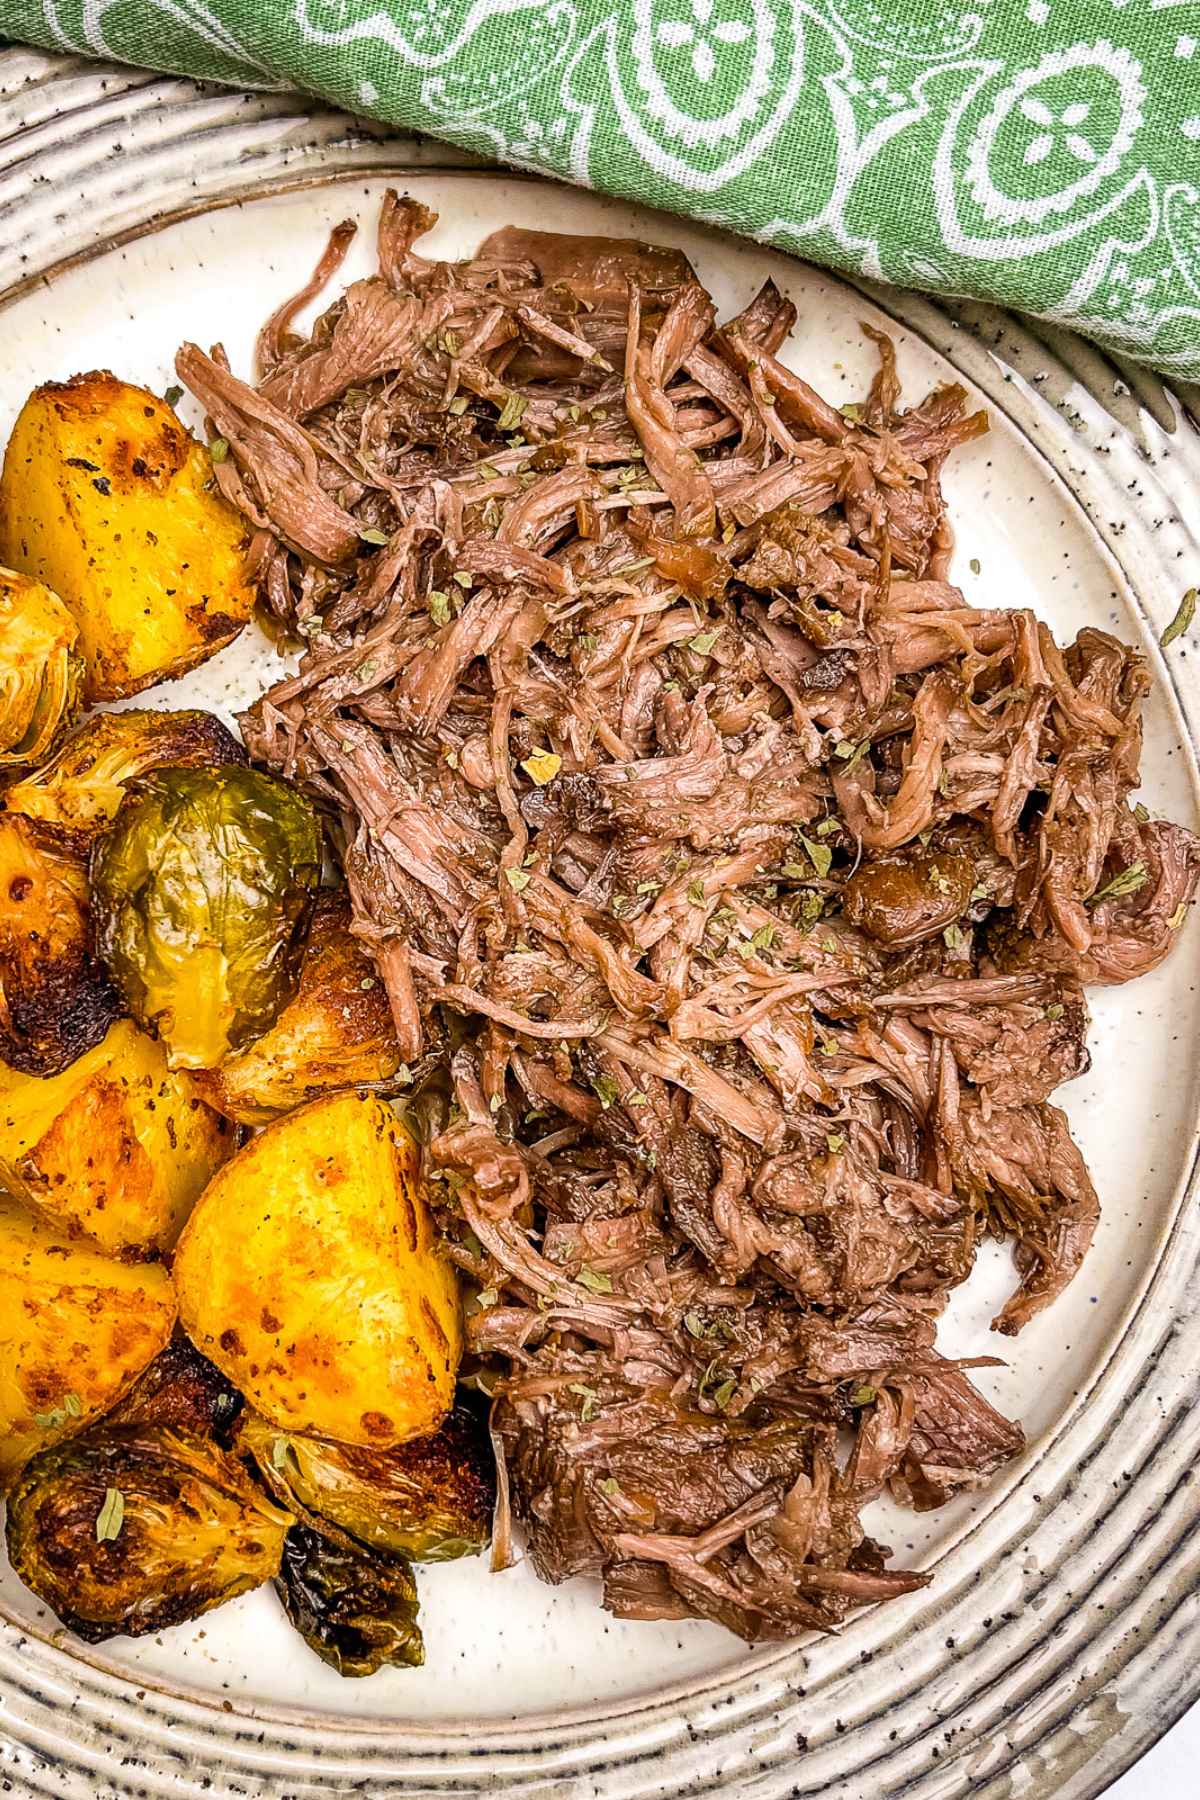 Shredded Beef on a plate with a side of roasted potatoes and brussels sprouts.